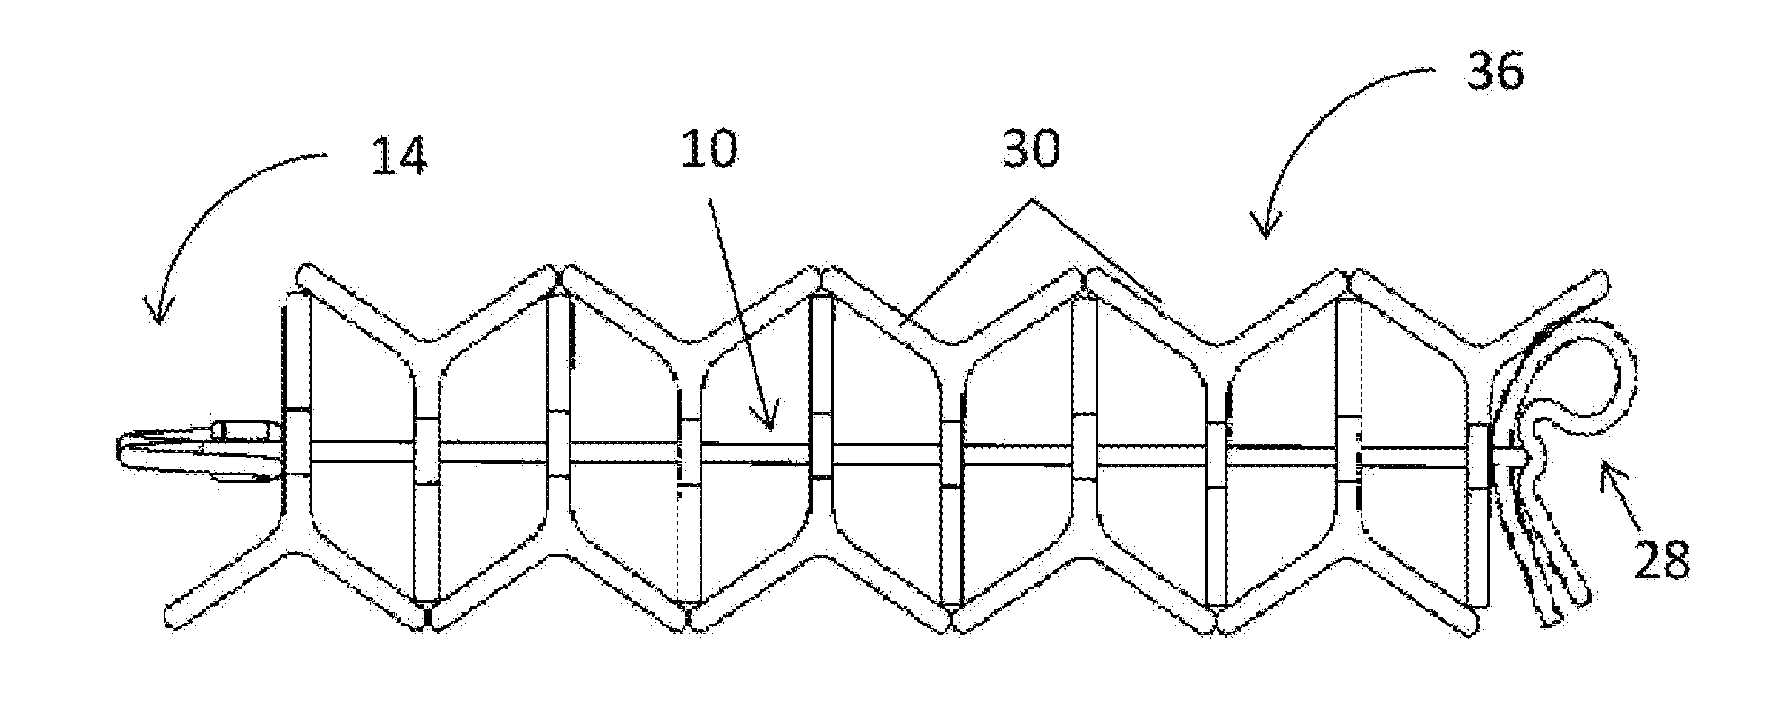 Device for securing posts together